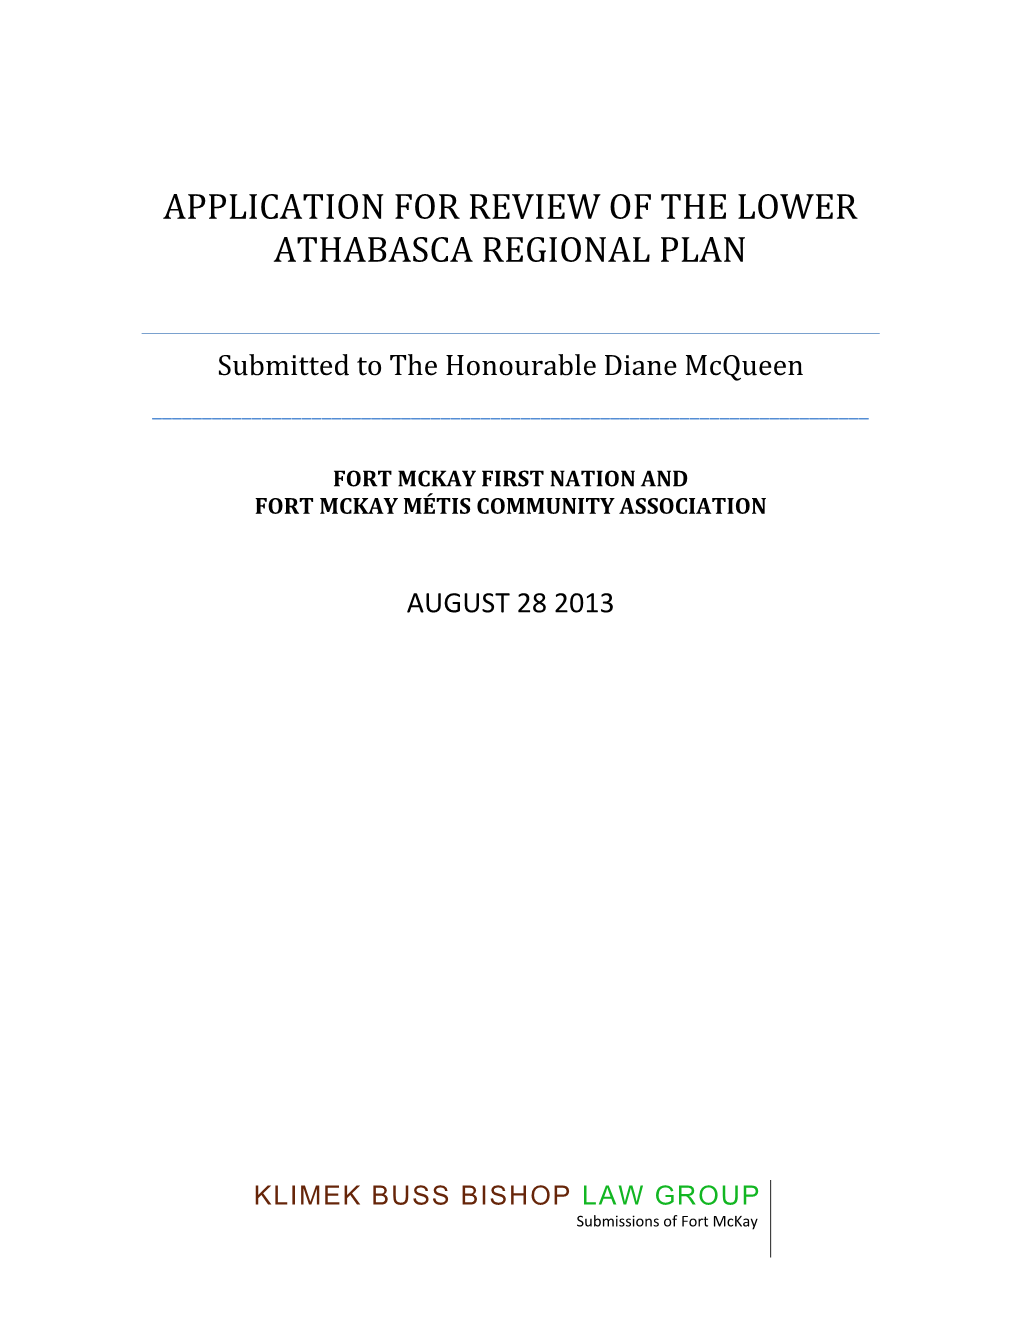 Application for Review of the Lower Athabasca Regional Plan